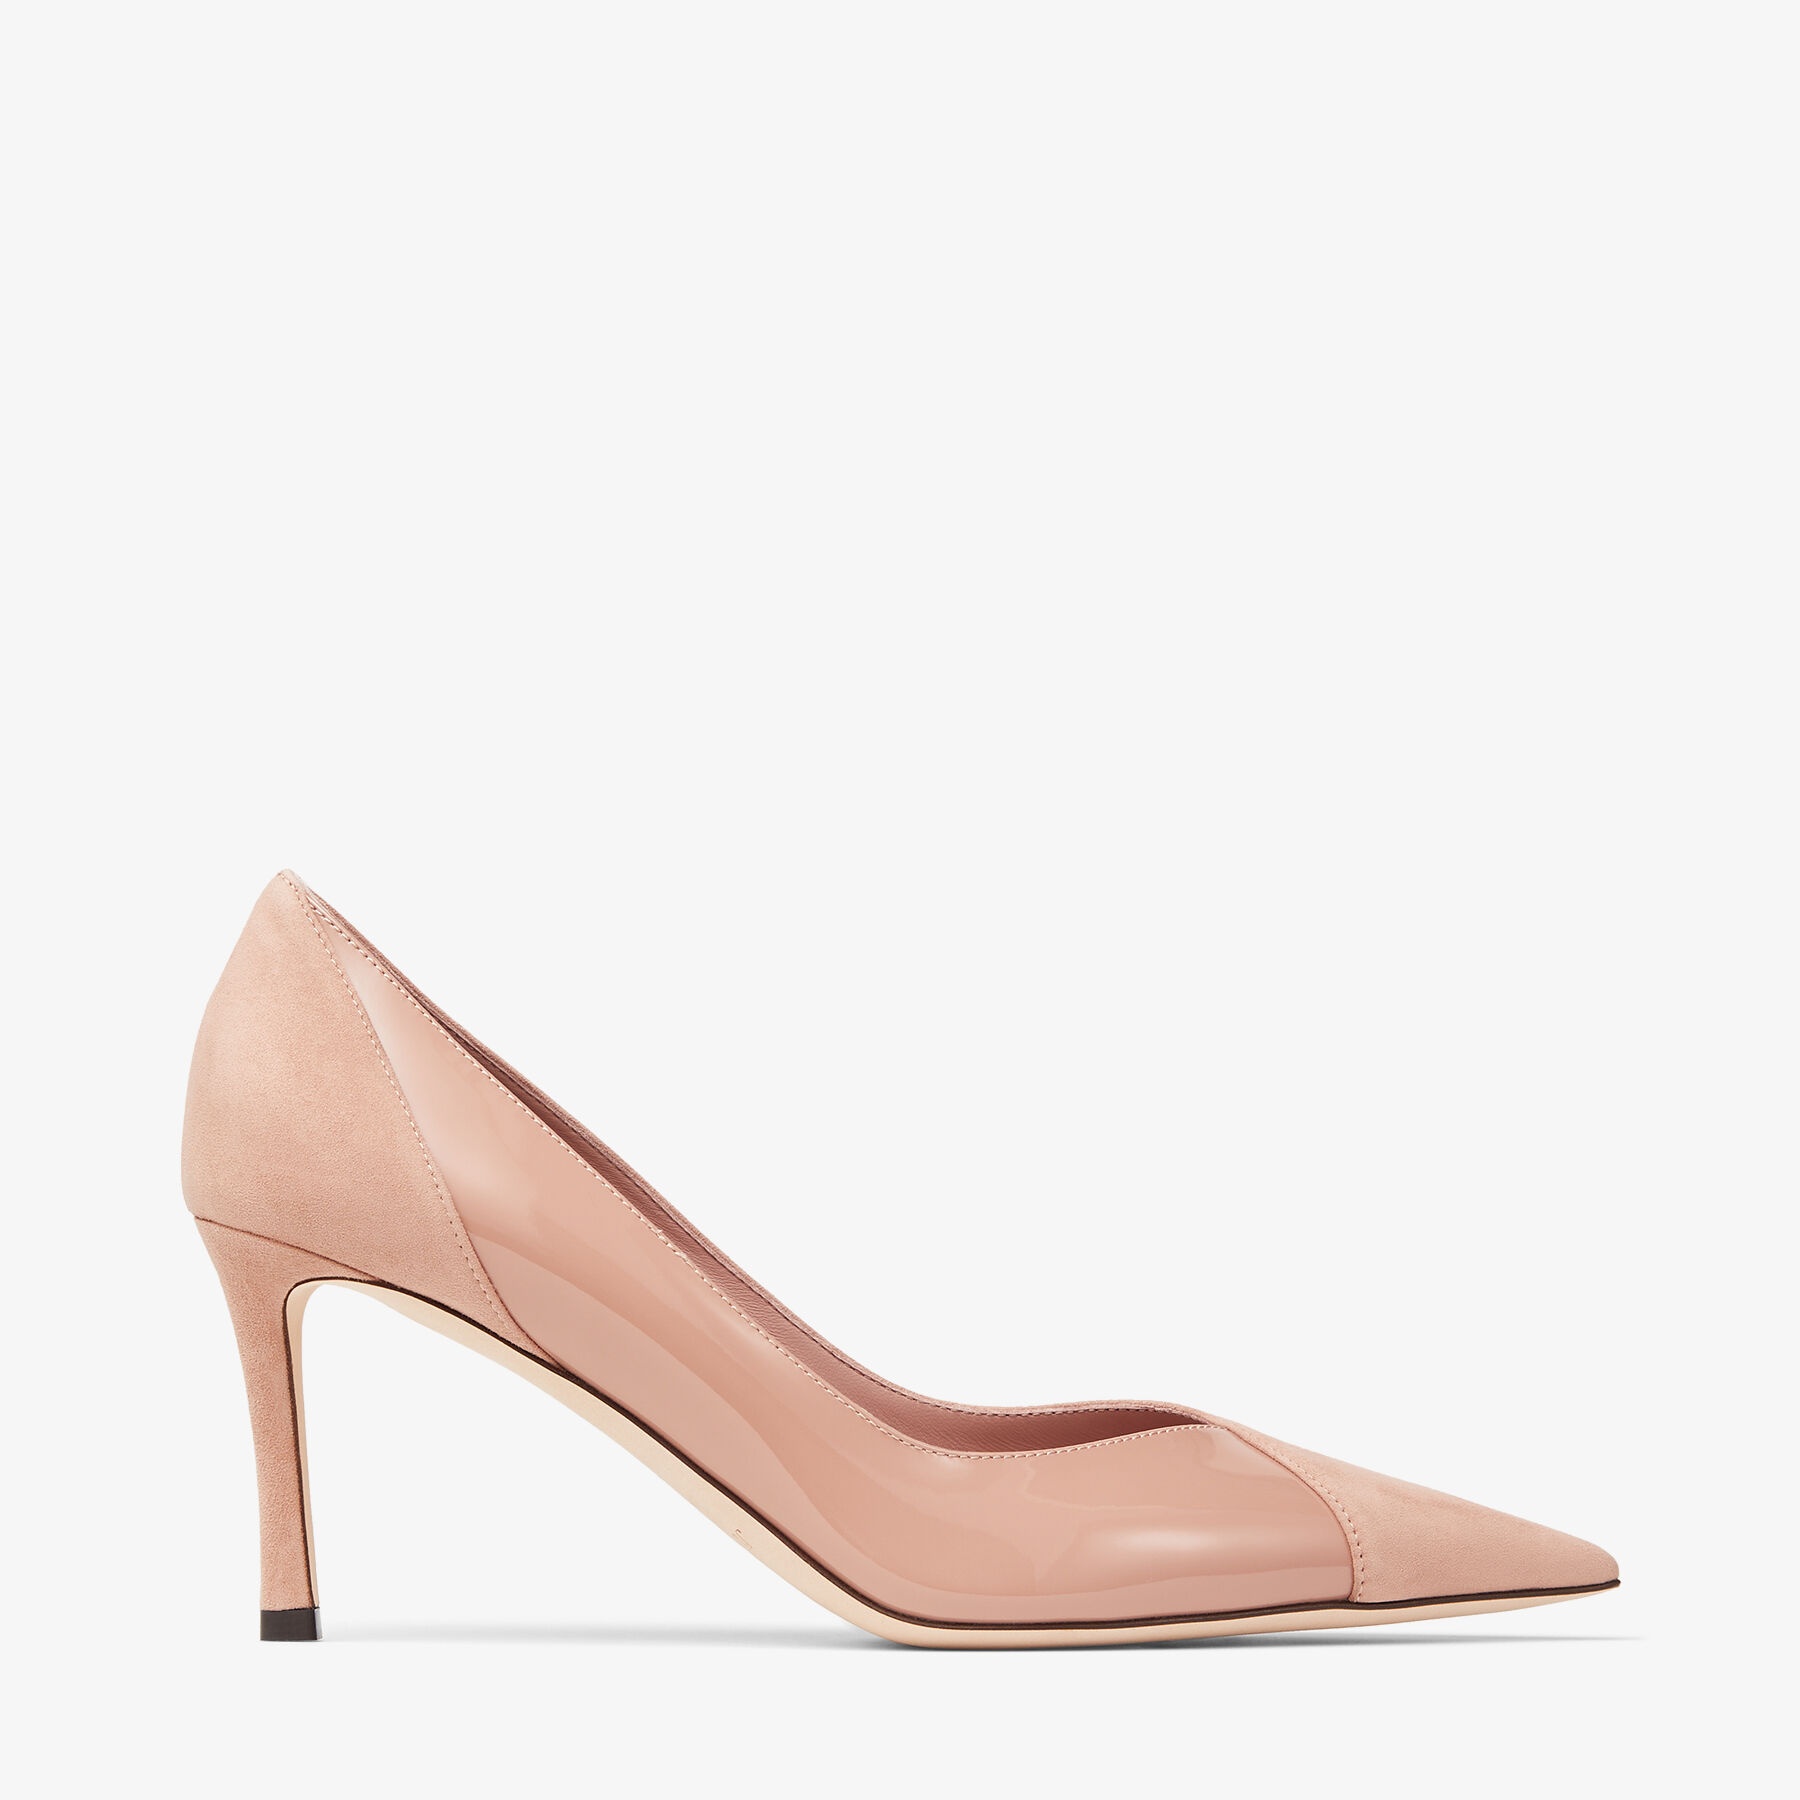 Cass 75
Ballet Pink Suede and Patent Pumps - 1